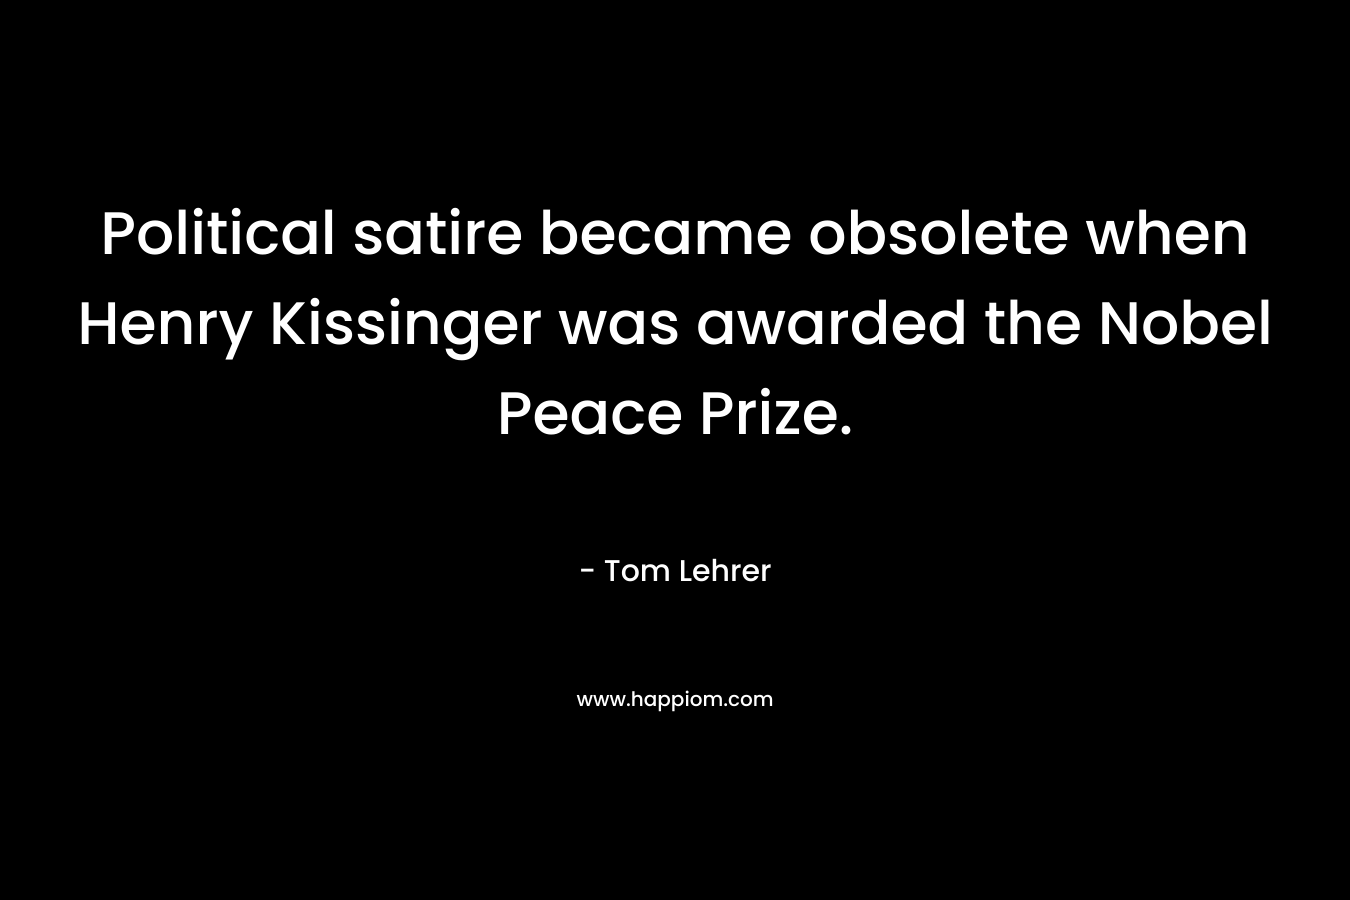 Political satire became obsolete when Henry Kissinger was awarded the Nobel Peace Prize.